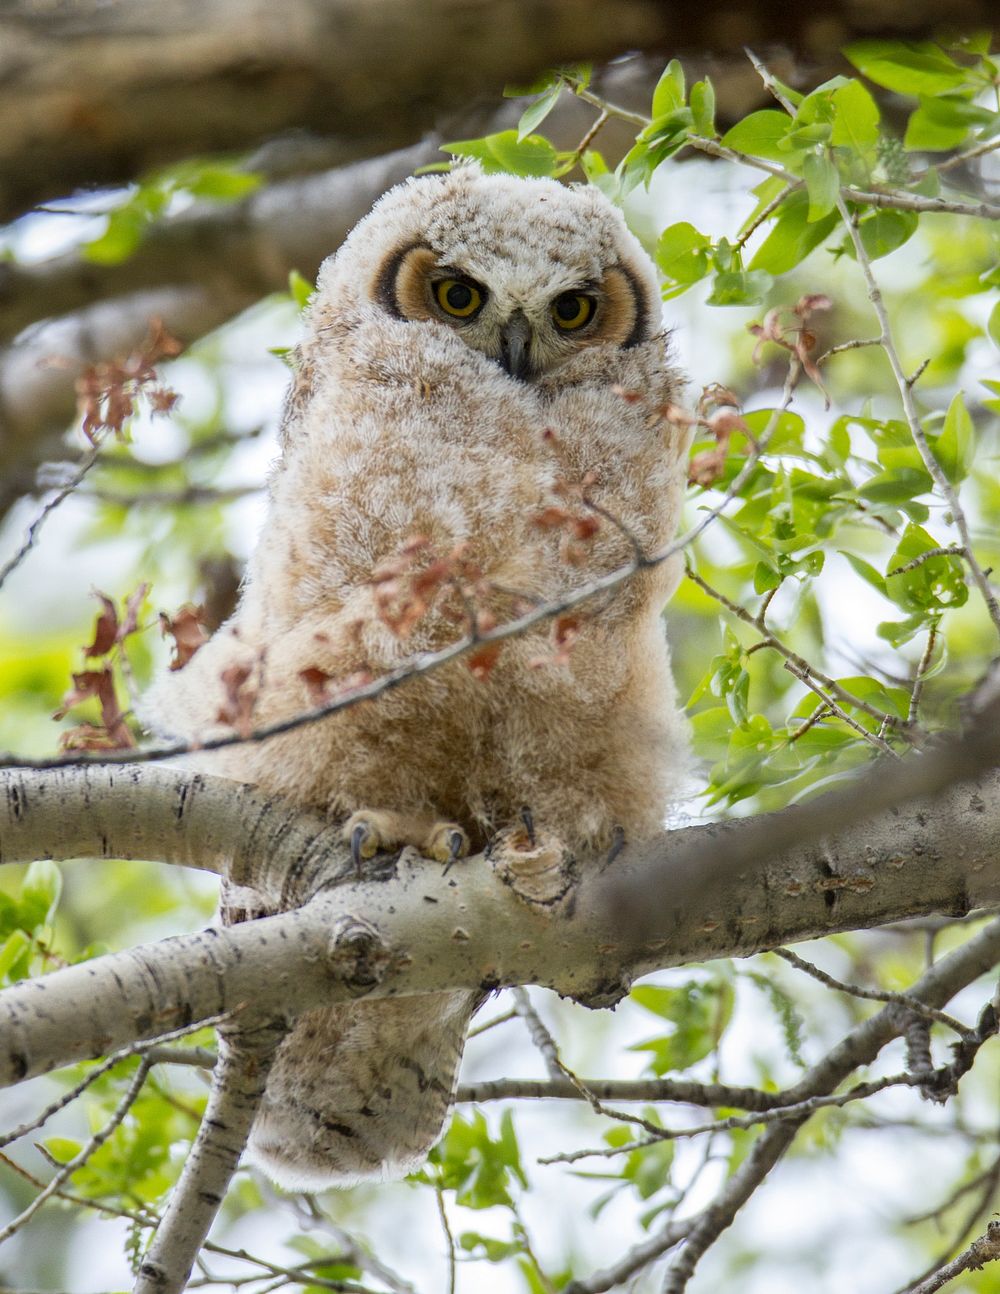 Great horned owl chick in cottonwood tree in Mammoth Hot Springs by Jim Peaco. Original public domain image from Flickr